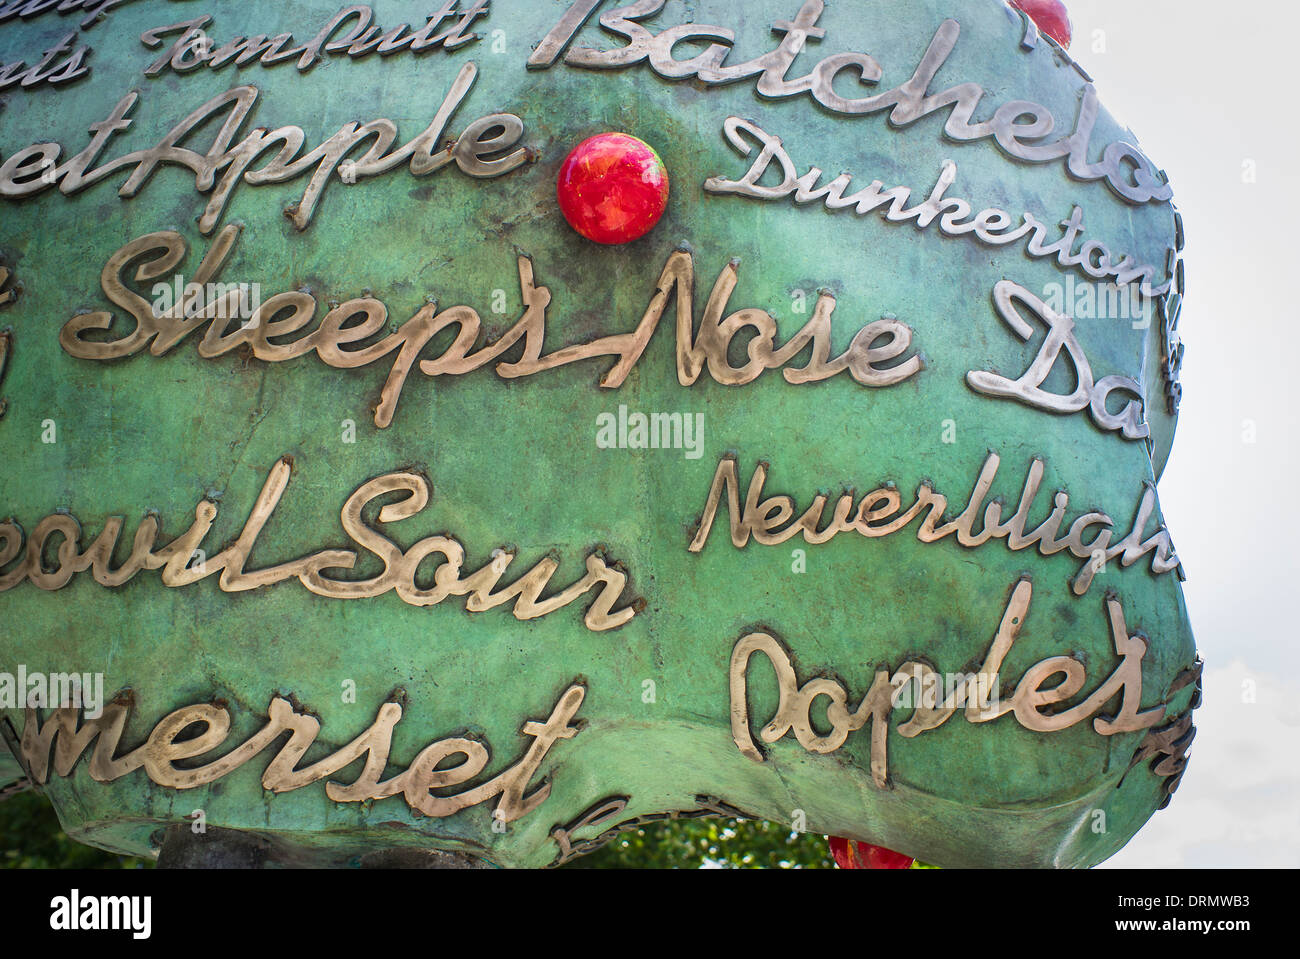 Modern sculpture commemorating historic cider apple varieties and names in UK Stock Photo